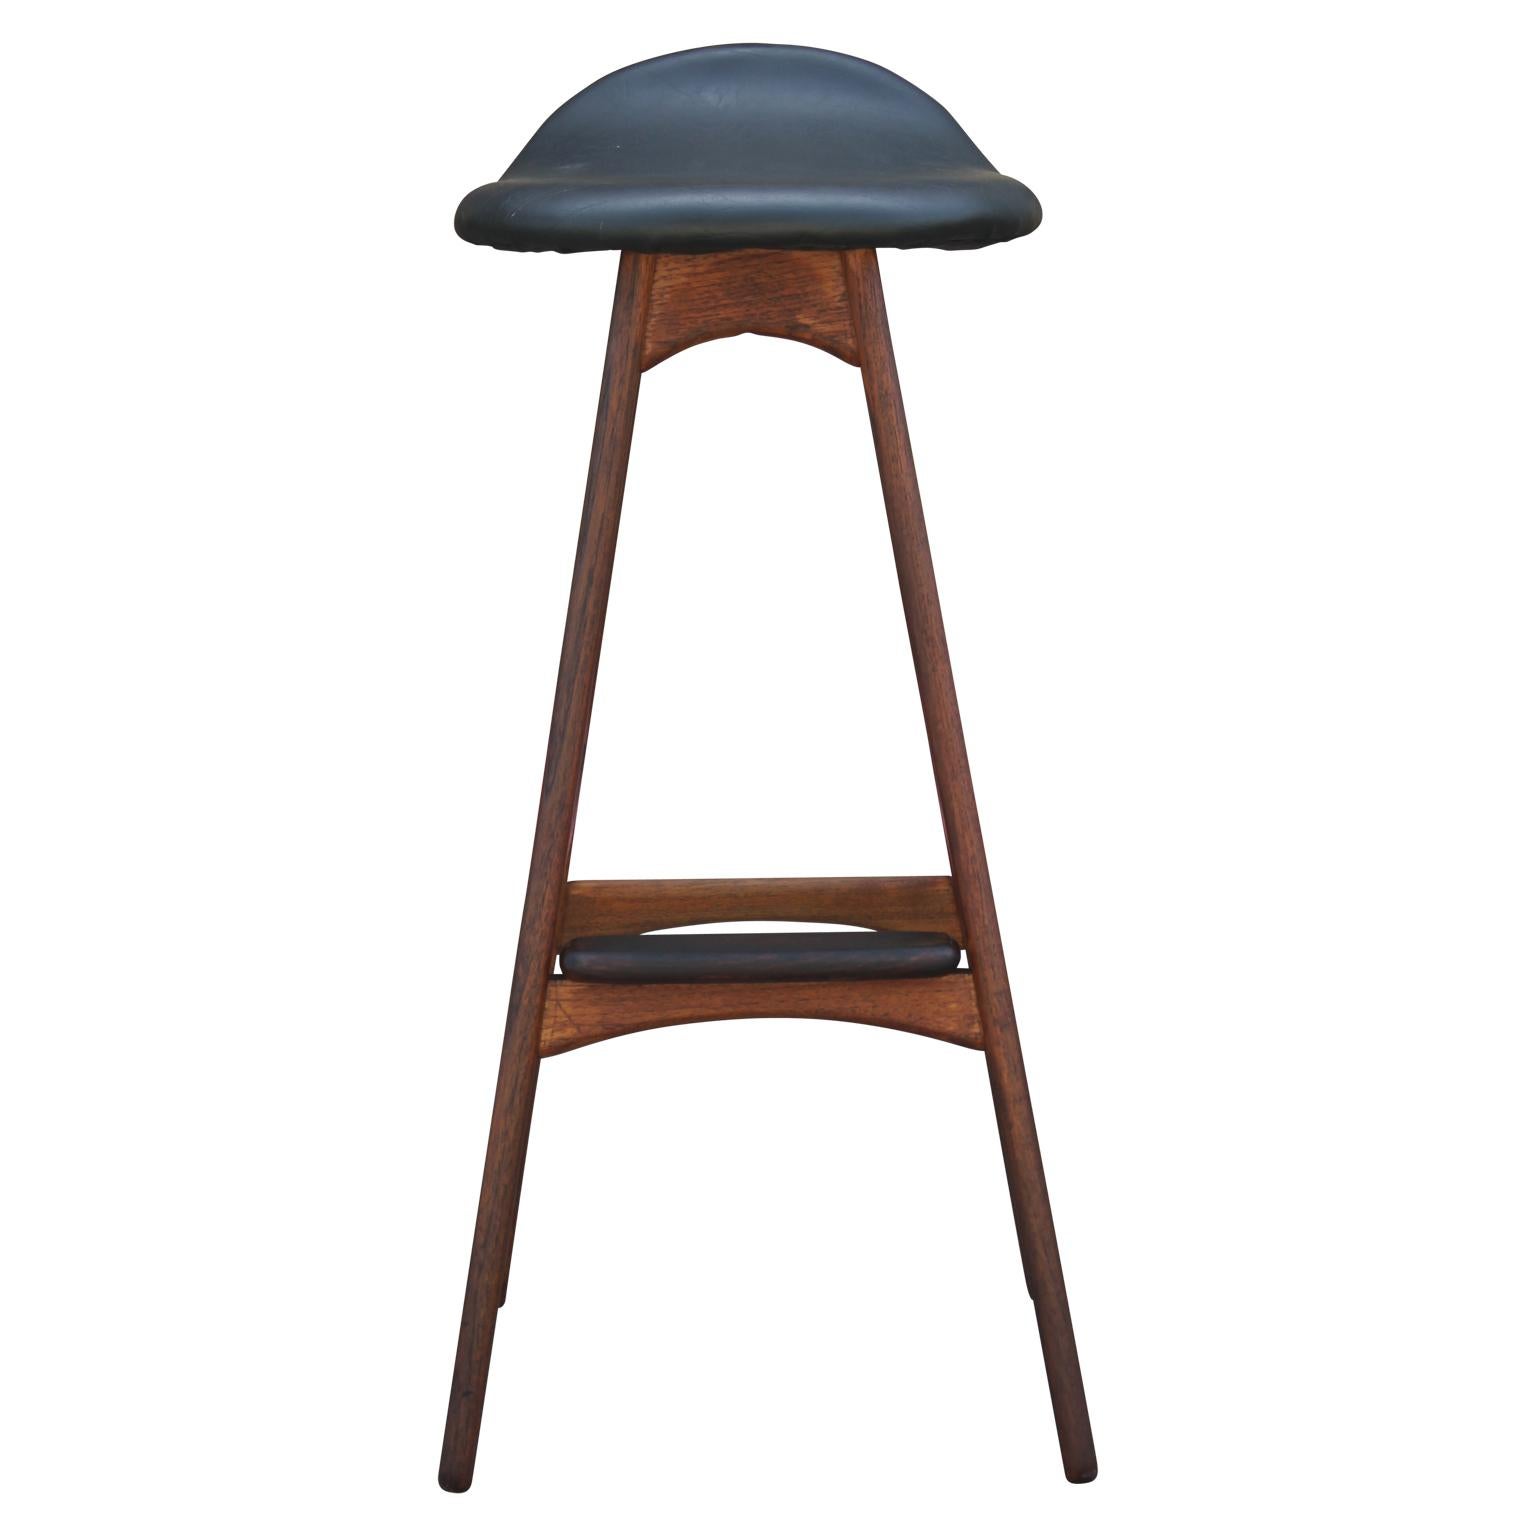 Modern and sleek teak and black leather bar stool with a rosewood foot rest designed by Erik Buck for Odense Møbler. Model OD61.